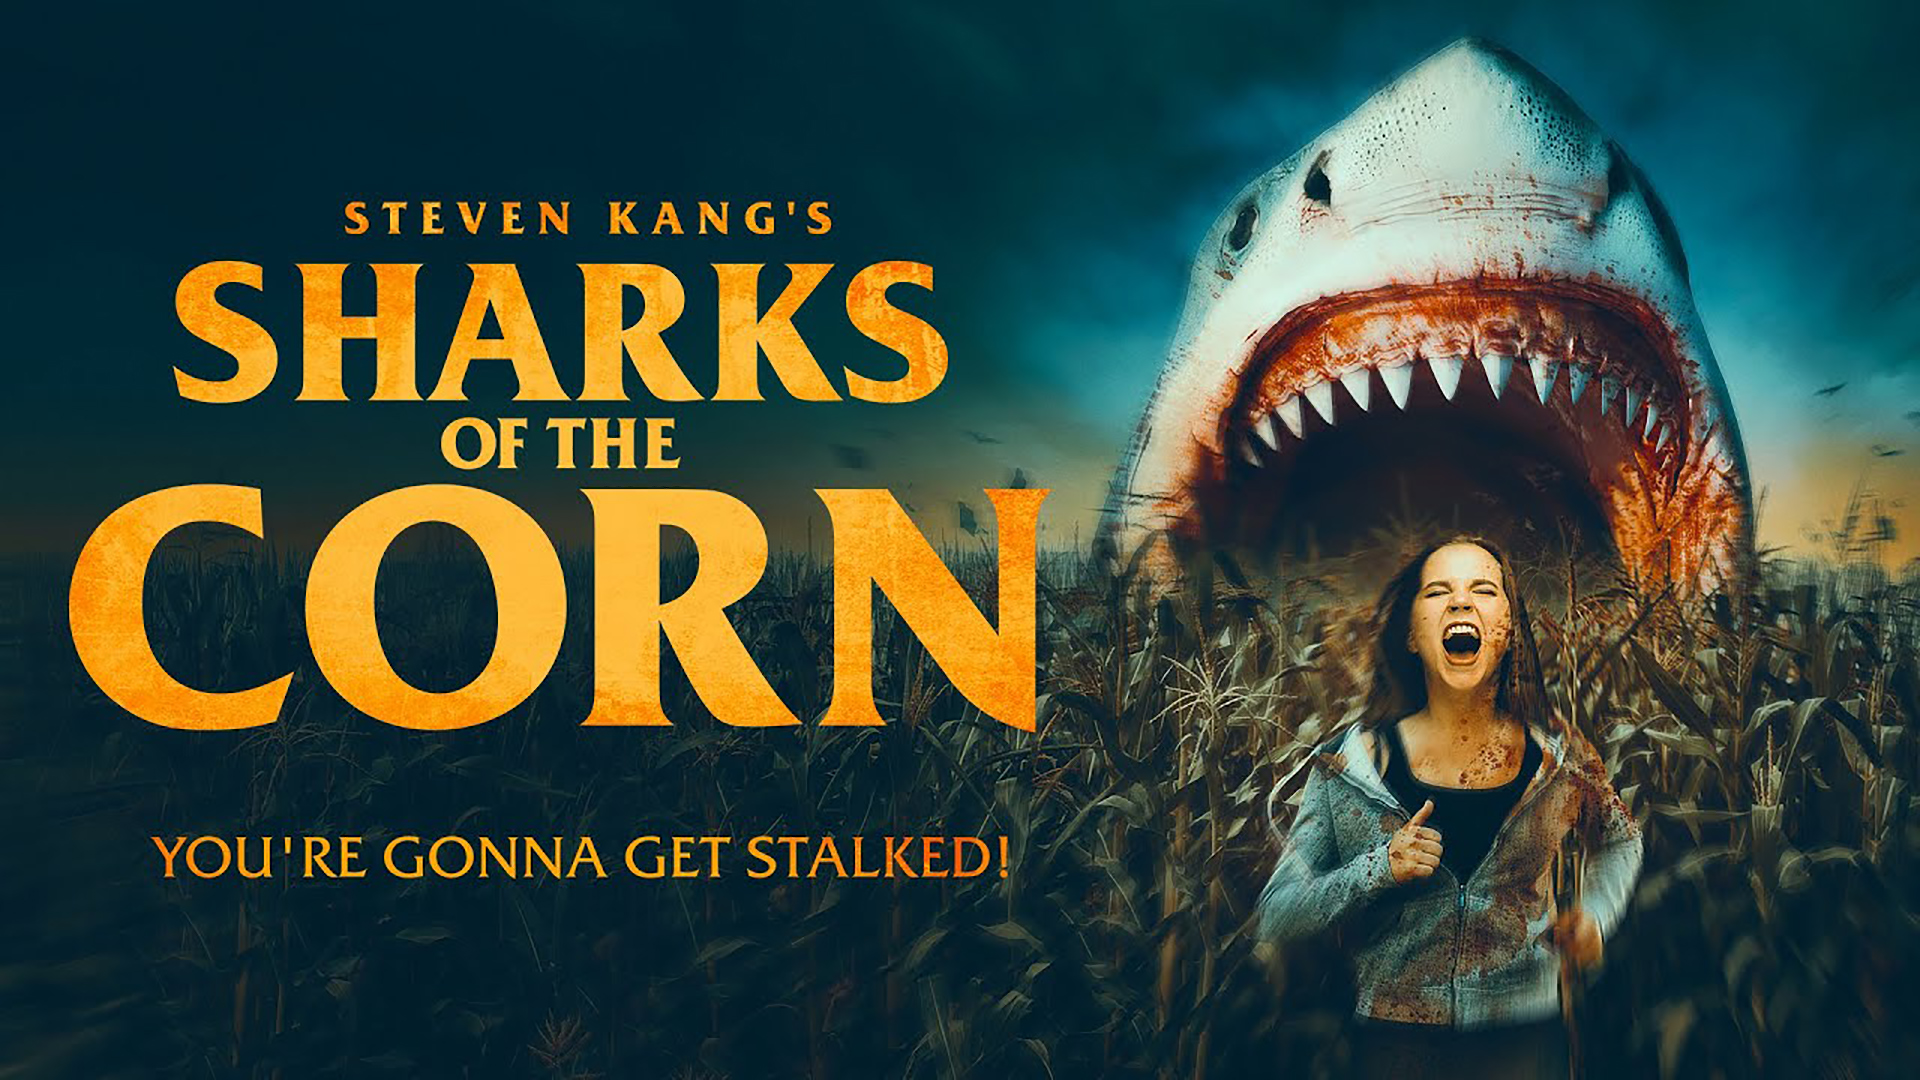 Sharks of the Corn